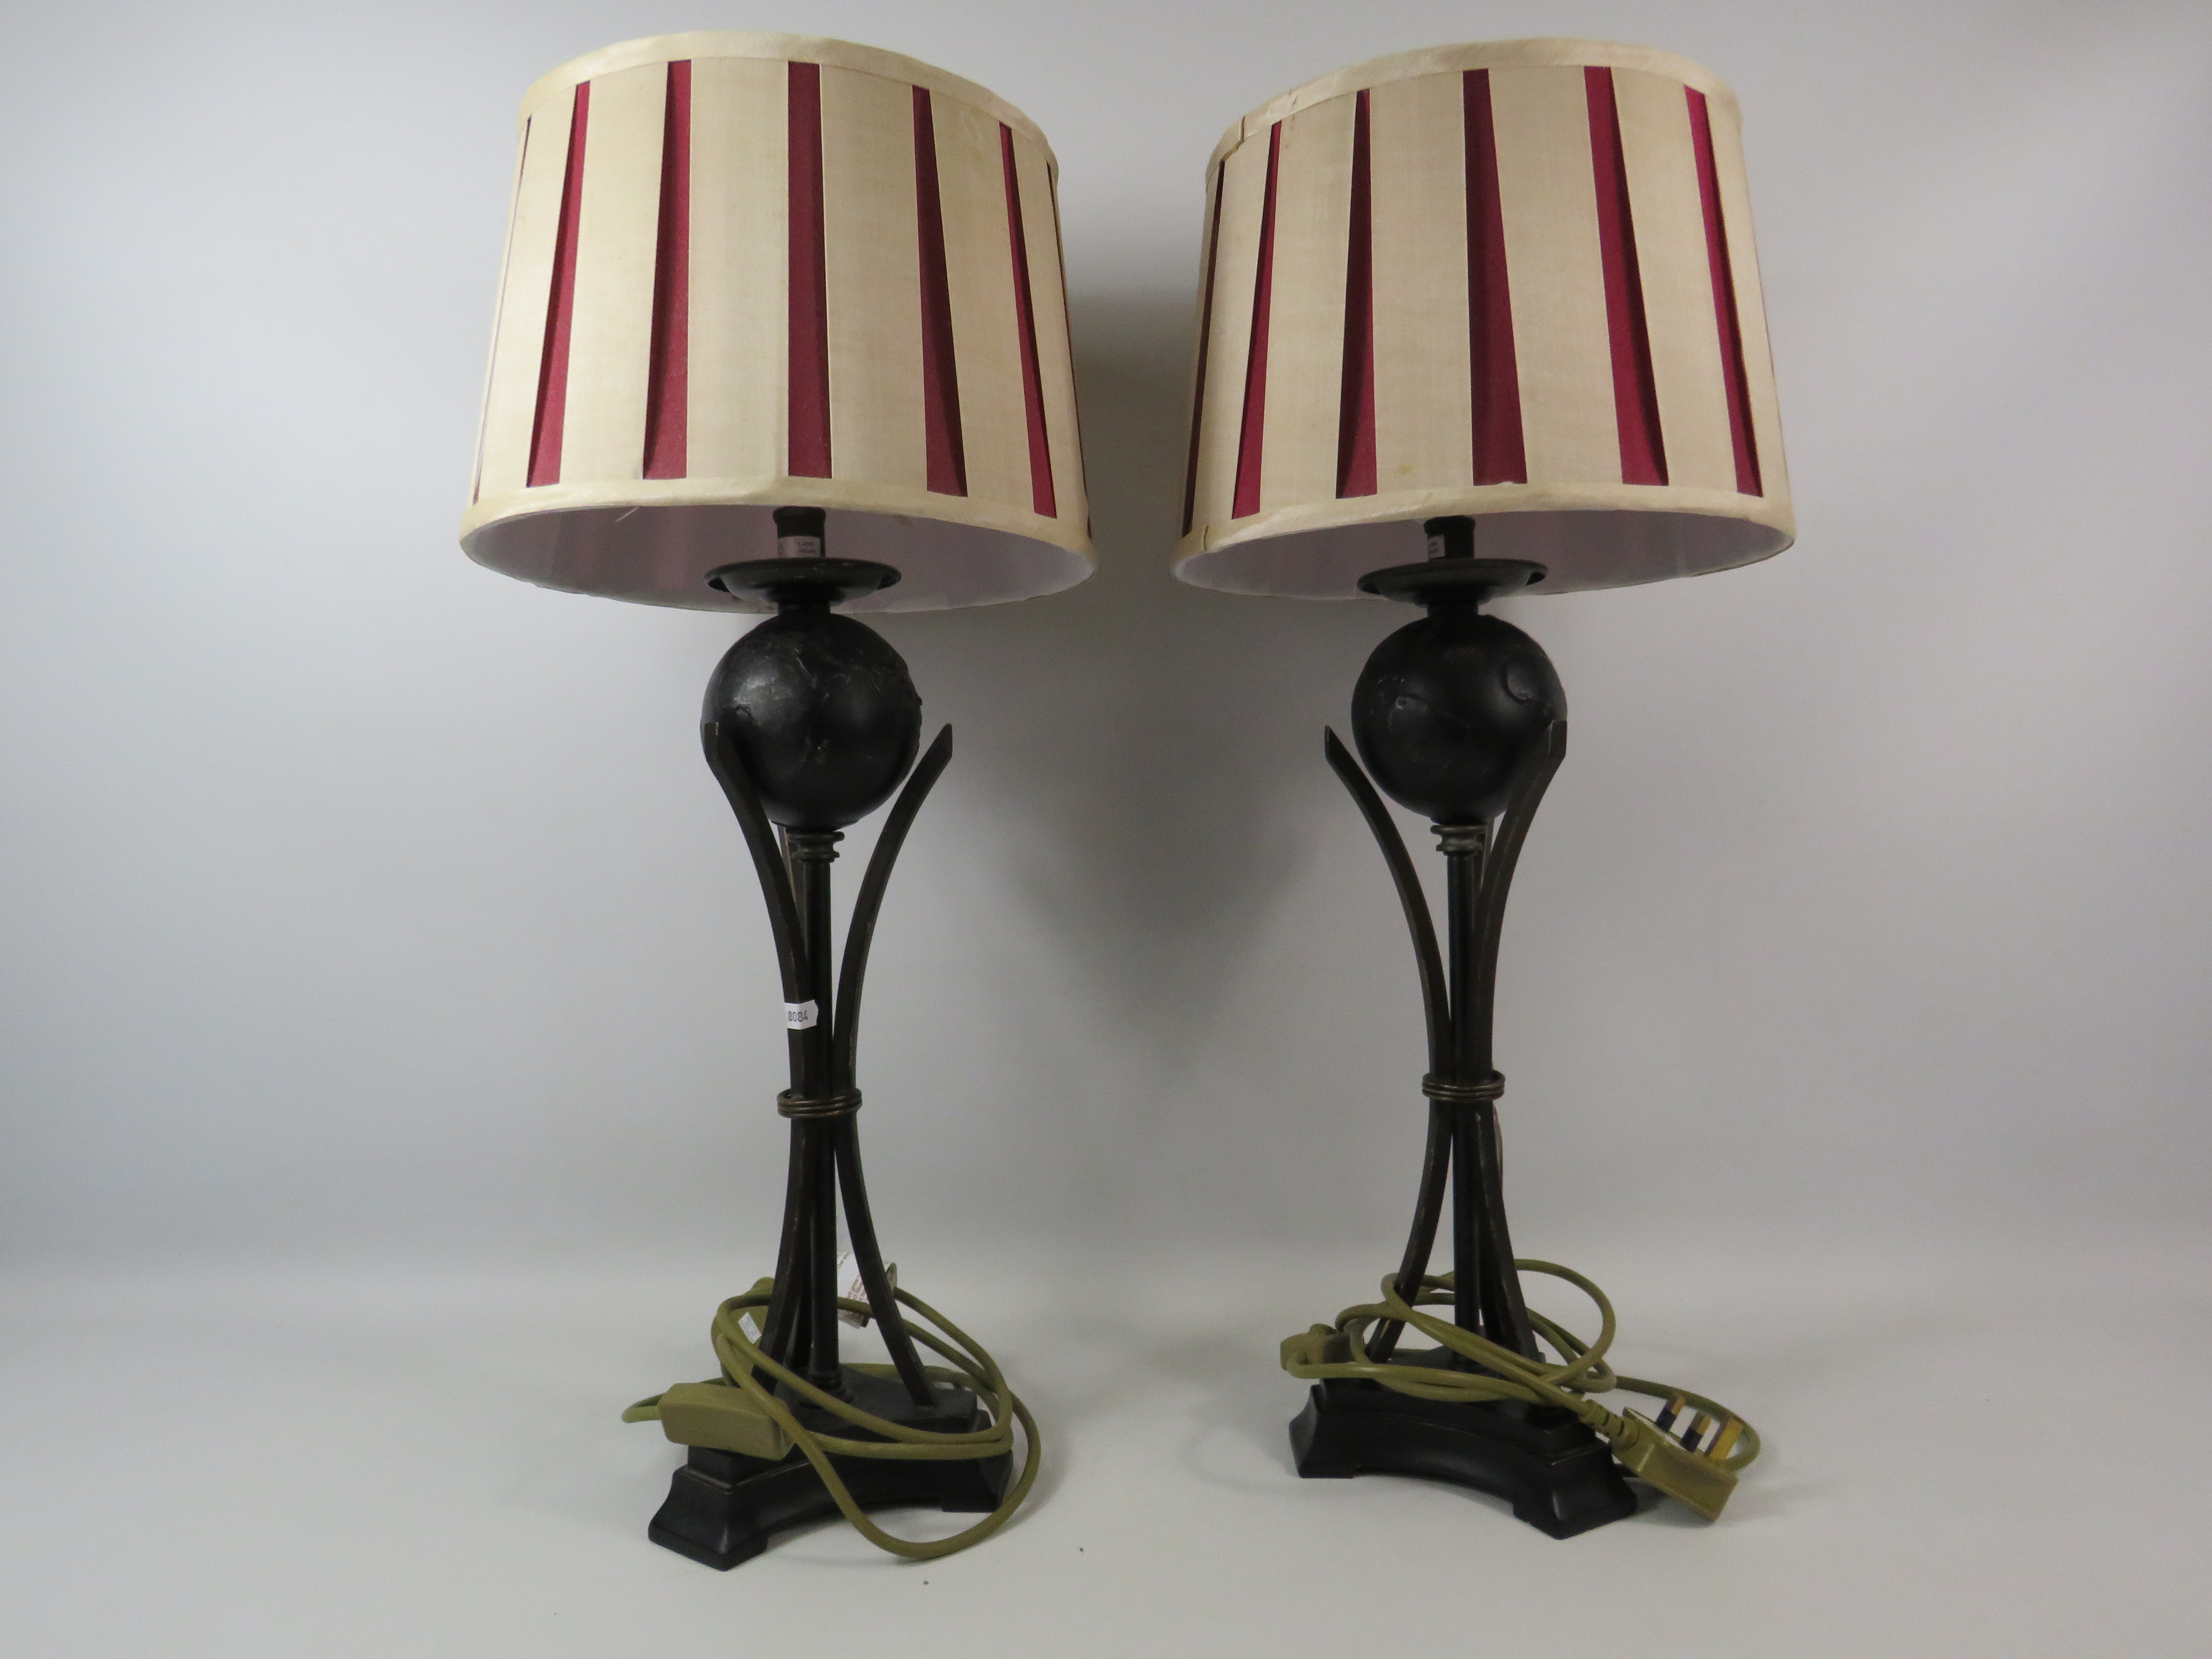 Pair of Globe table lamps, approx 20" tall to the top of the light fitting.